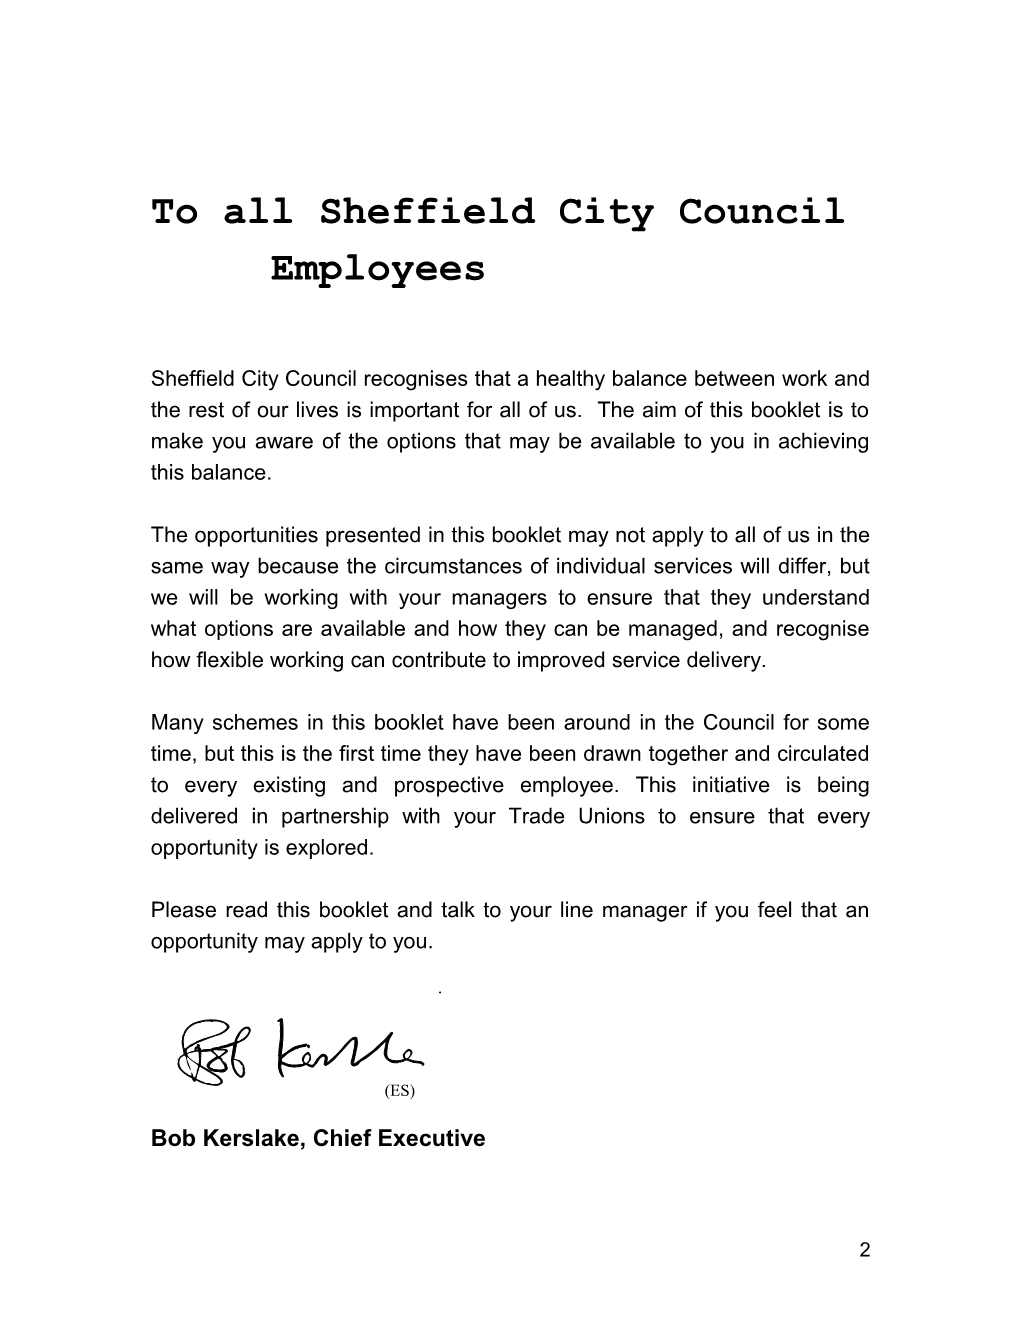 Opportunities for Flexible Working at Sheffield City Council